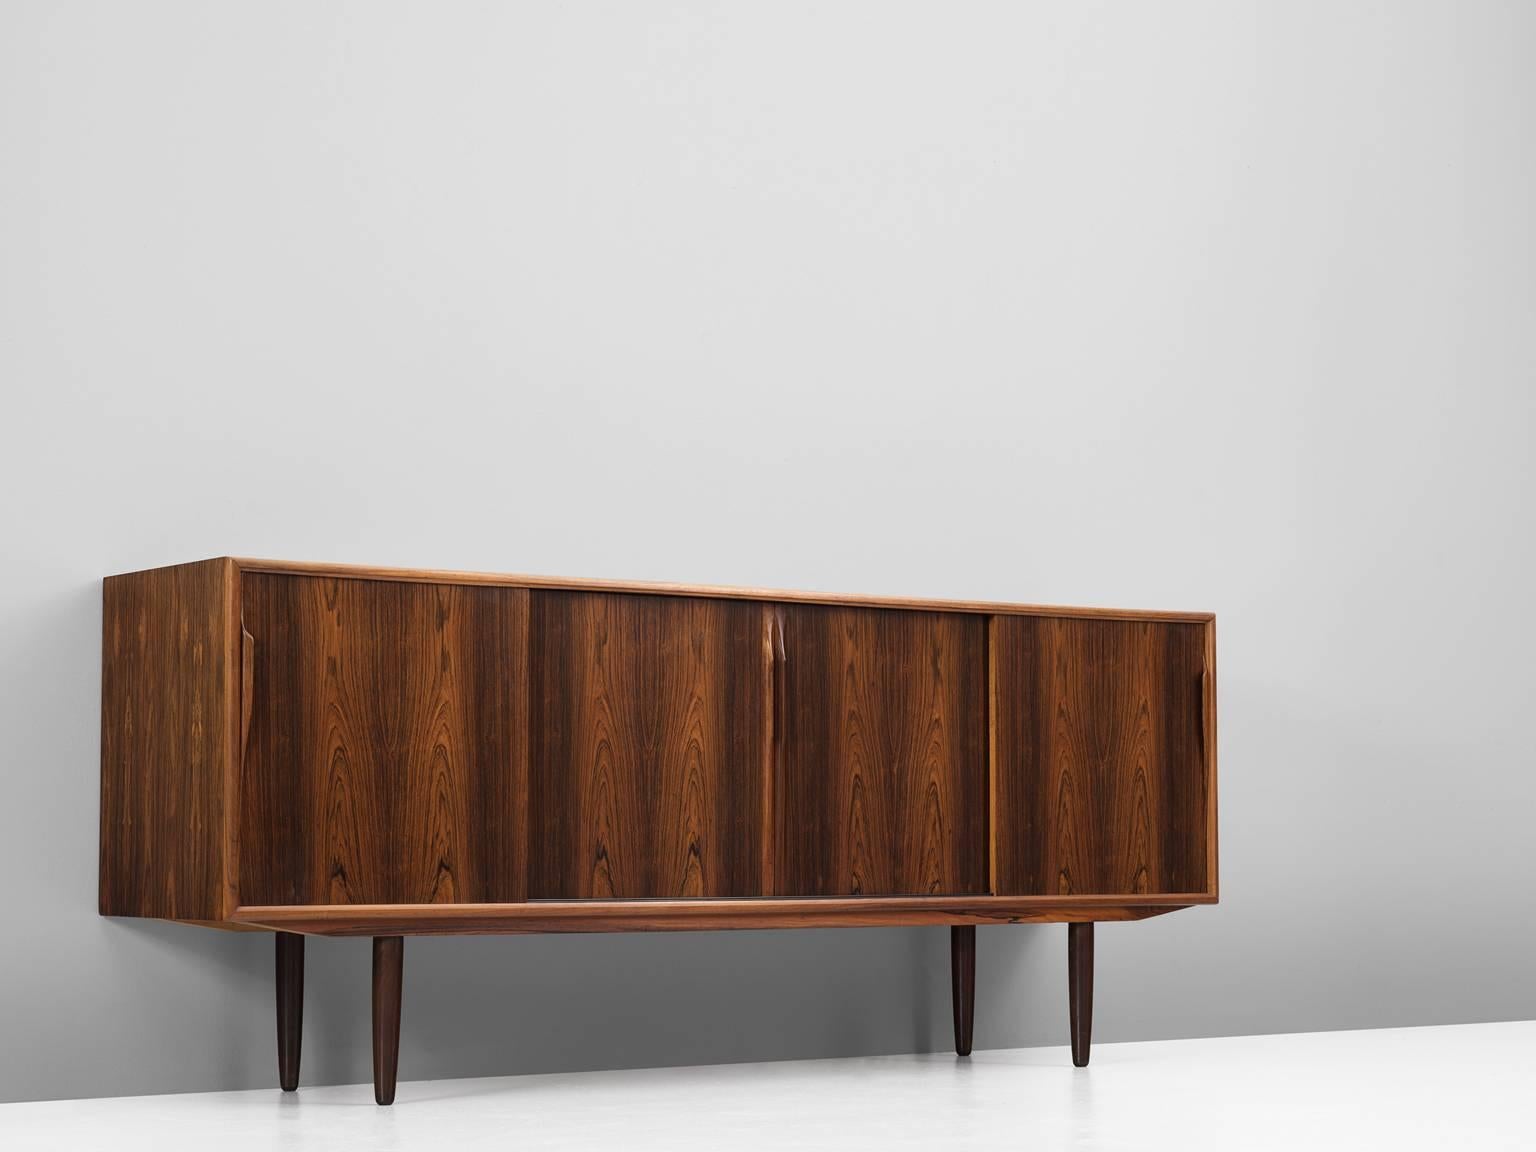 Sideboard, in rosewood, Denmark, 1960s.

This highly refined credenza has a modest and well proportioned design, showing extraordinary rosewood veneer. The four sliding doors have an interesting mirrored pattern of a lively grain. The contrasting